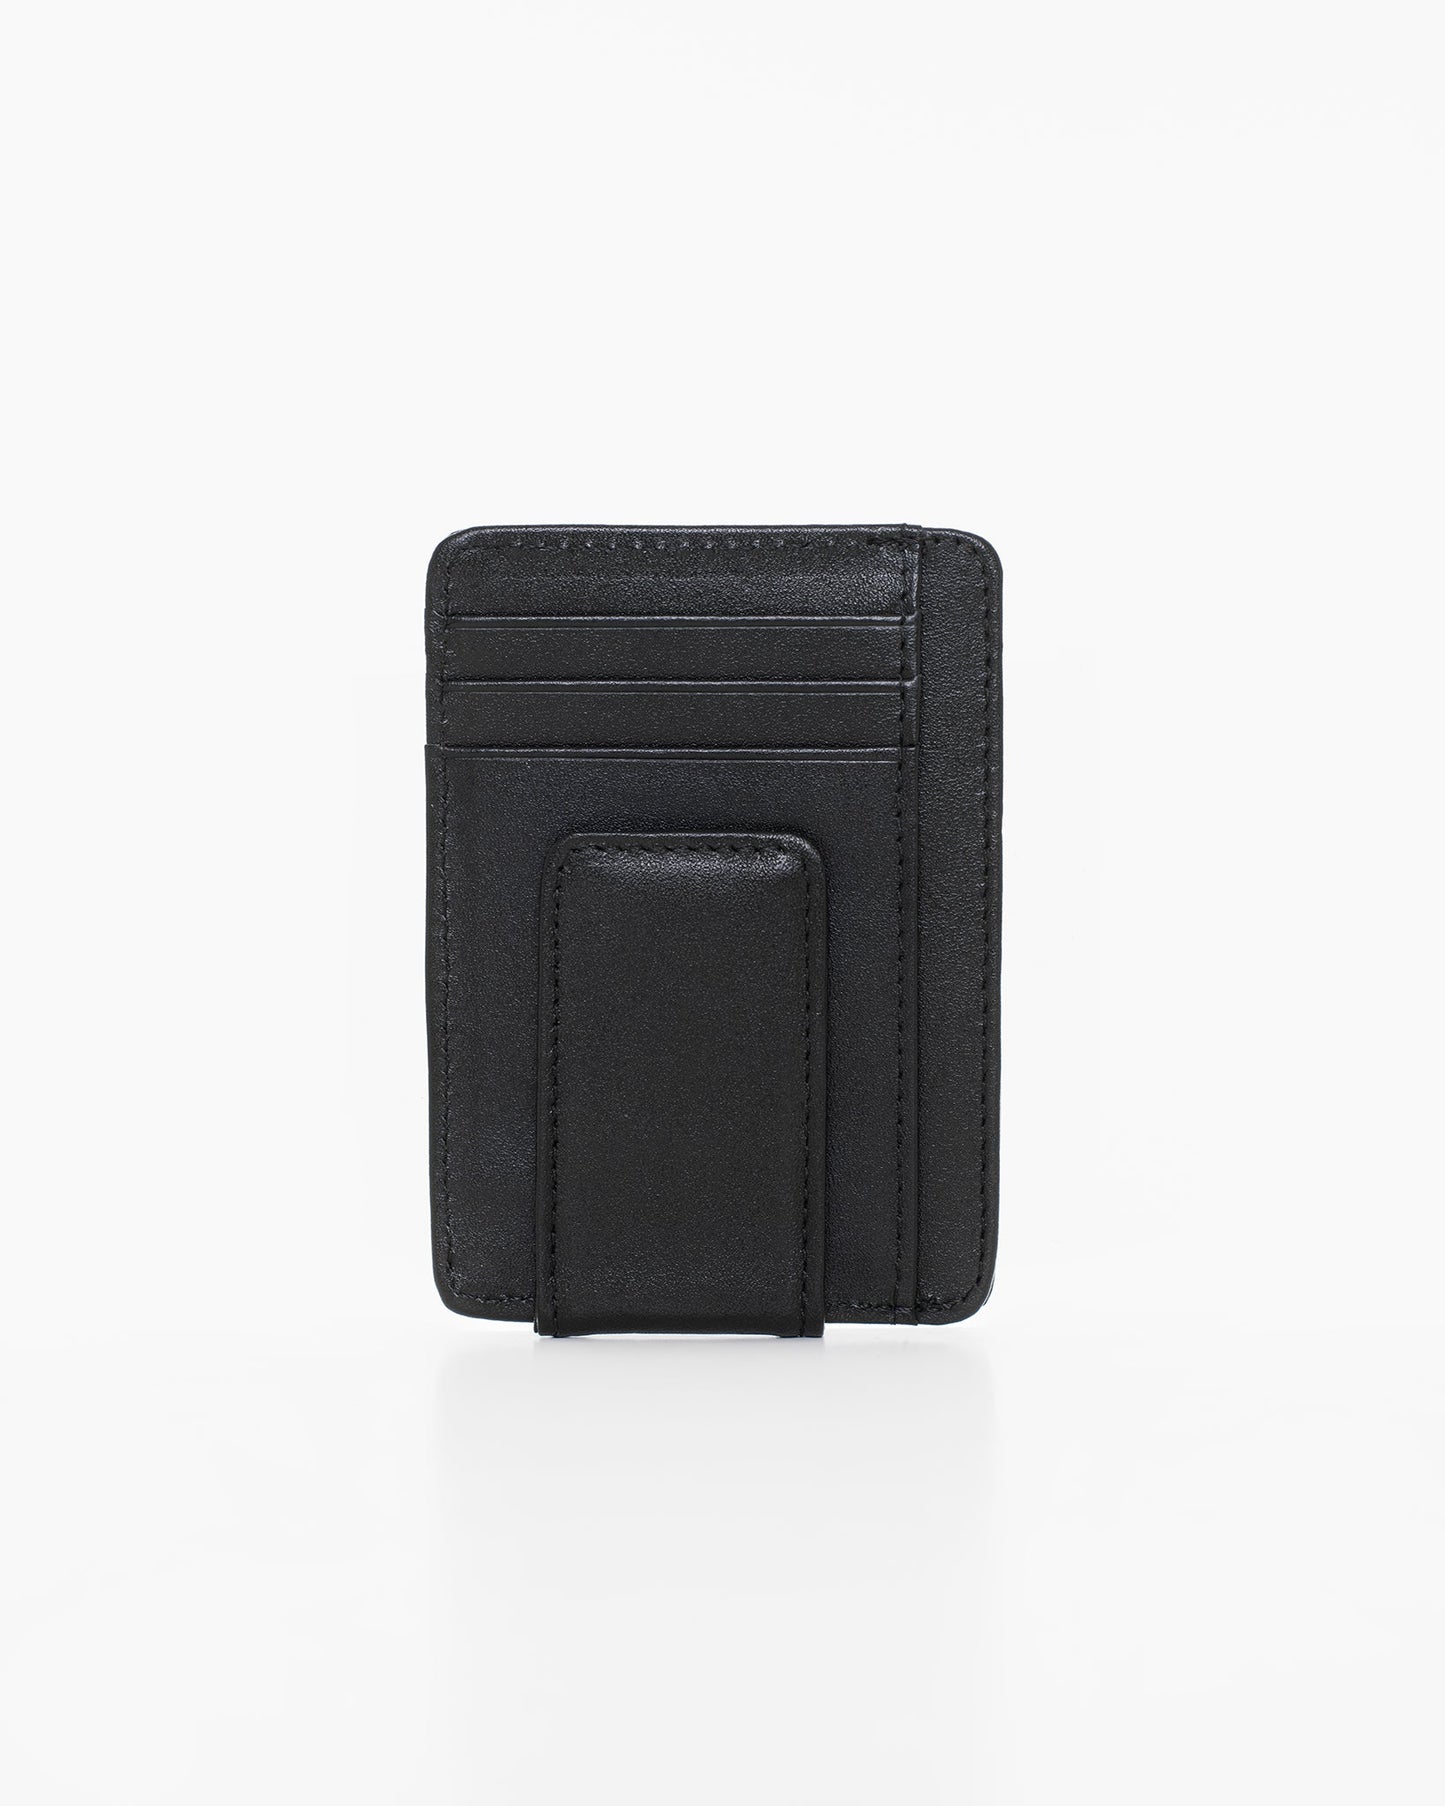 A black leather RFID-blocking card holder with a magnetic clip for cash, featuring 8 slots including a transparent one. Dimensions: 11 x 8 x 1 cm.